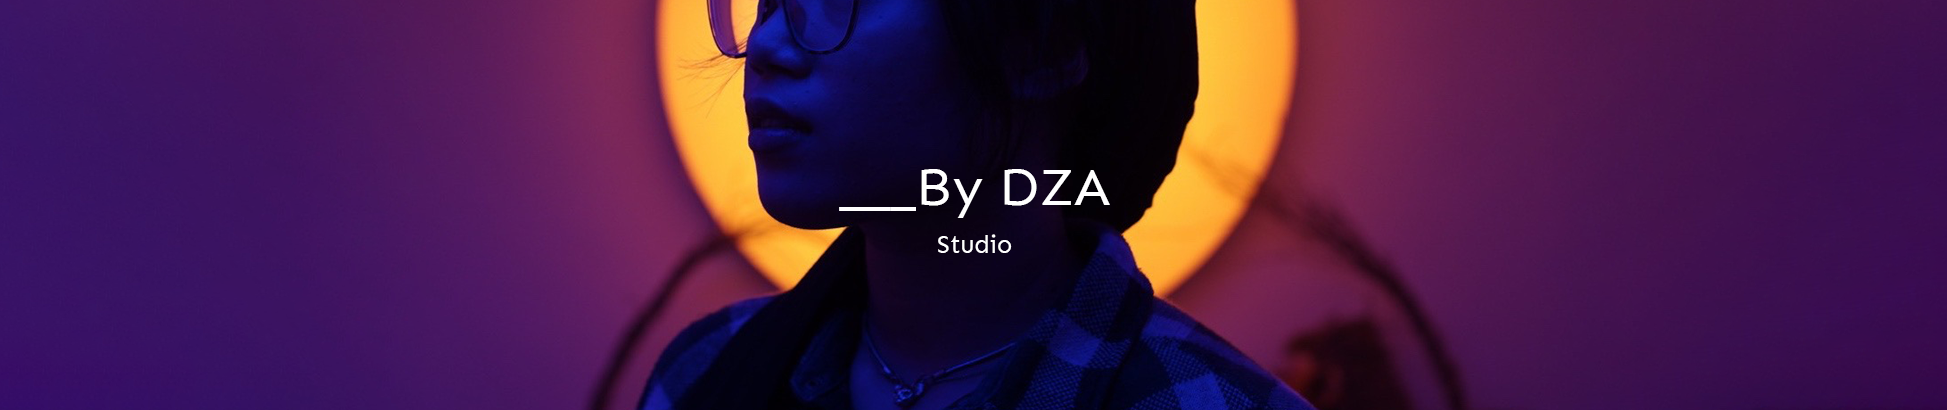 by DZA's profile banner